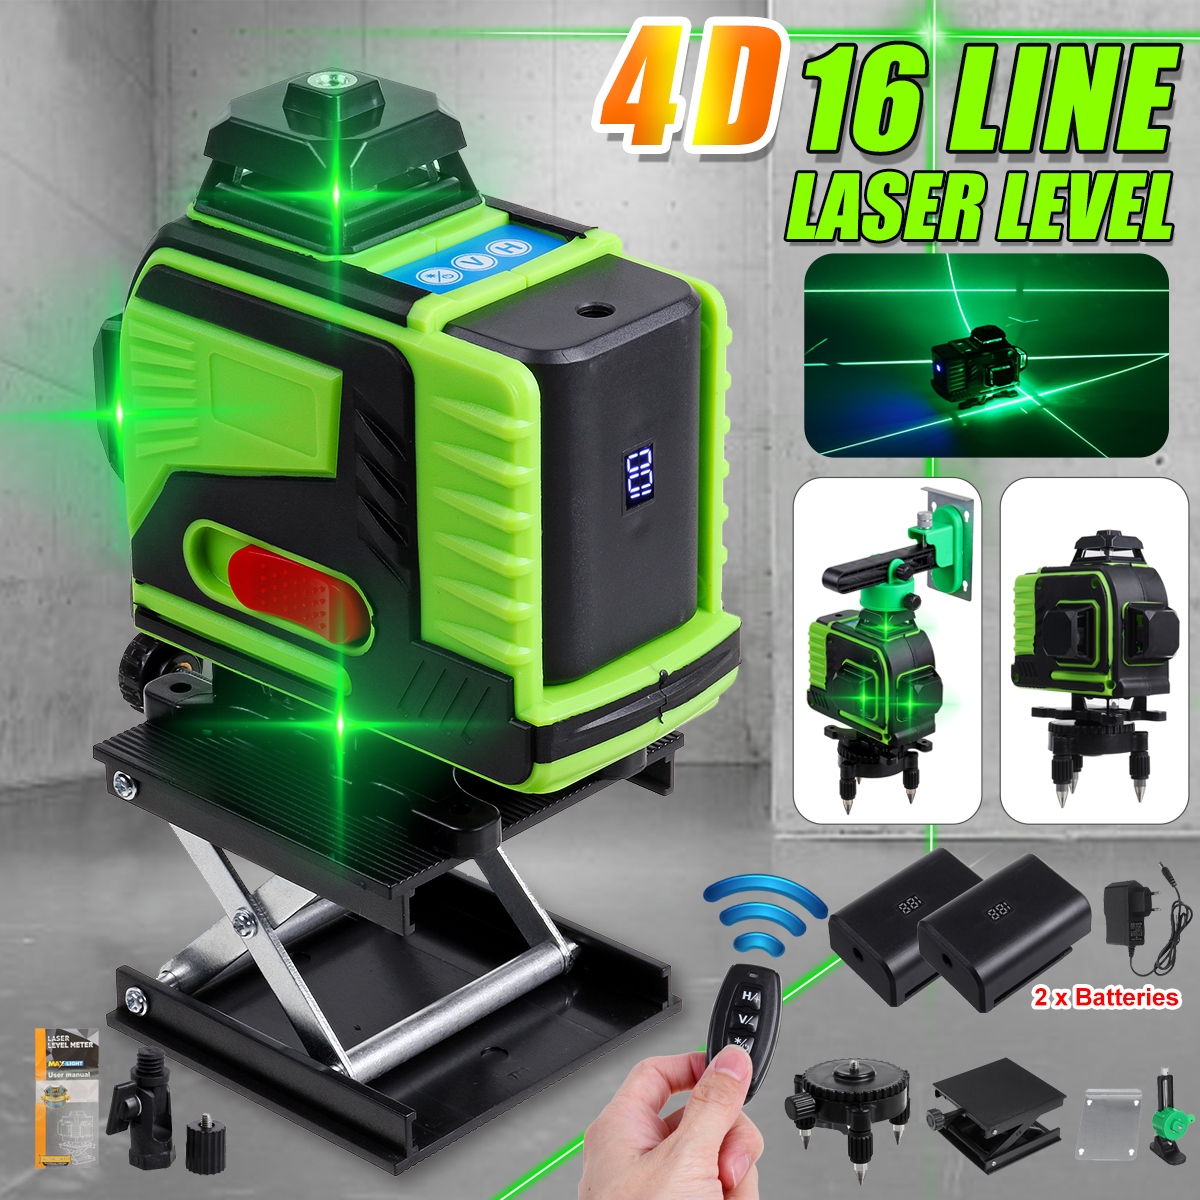 4D-16-Lines-Green-Light-Laser-Levels--360deg-Self-Rotary-Leveling-Measure-Tools-with-2PCS-Lithium-Ba-1941453-1